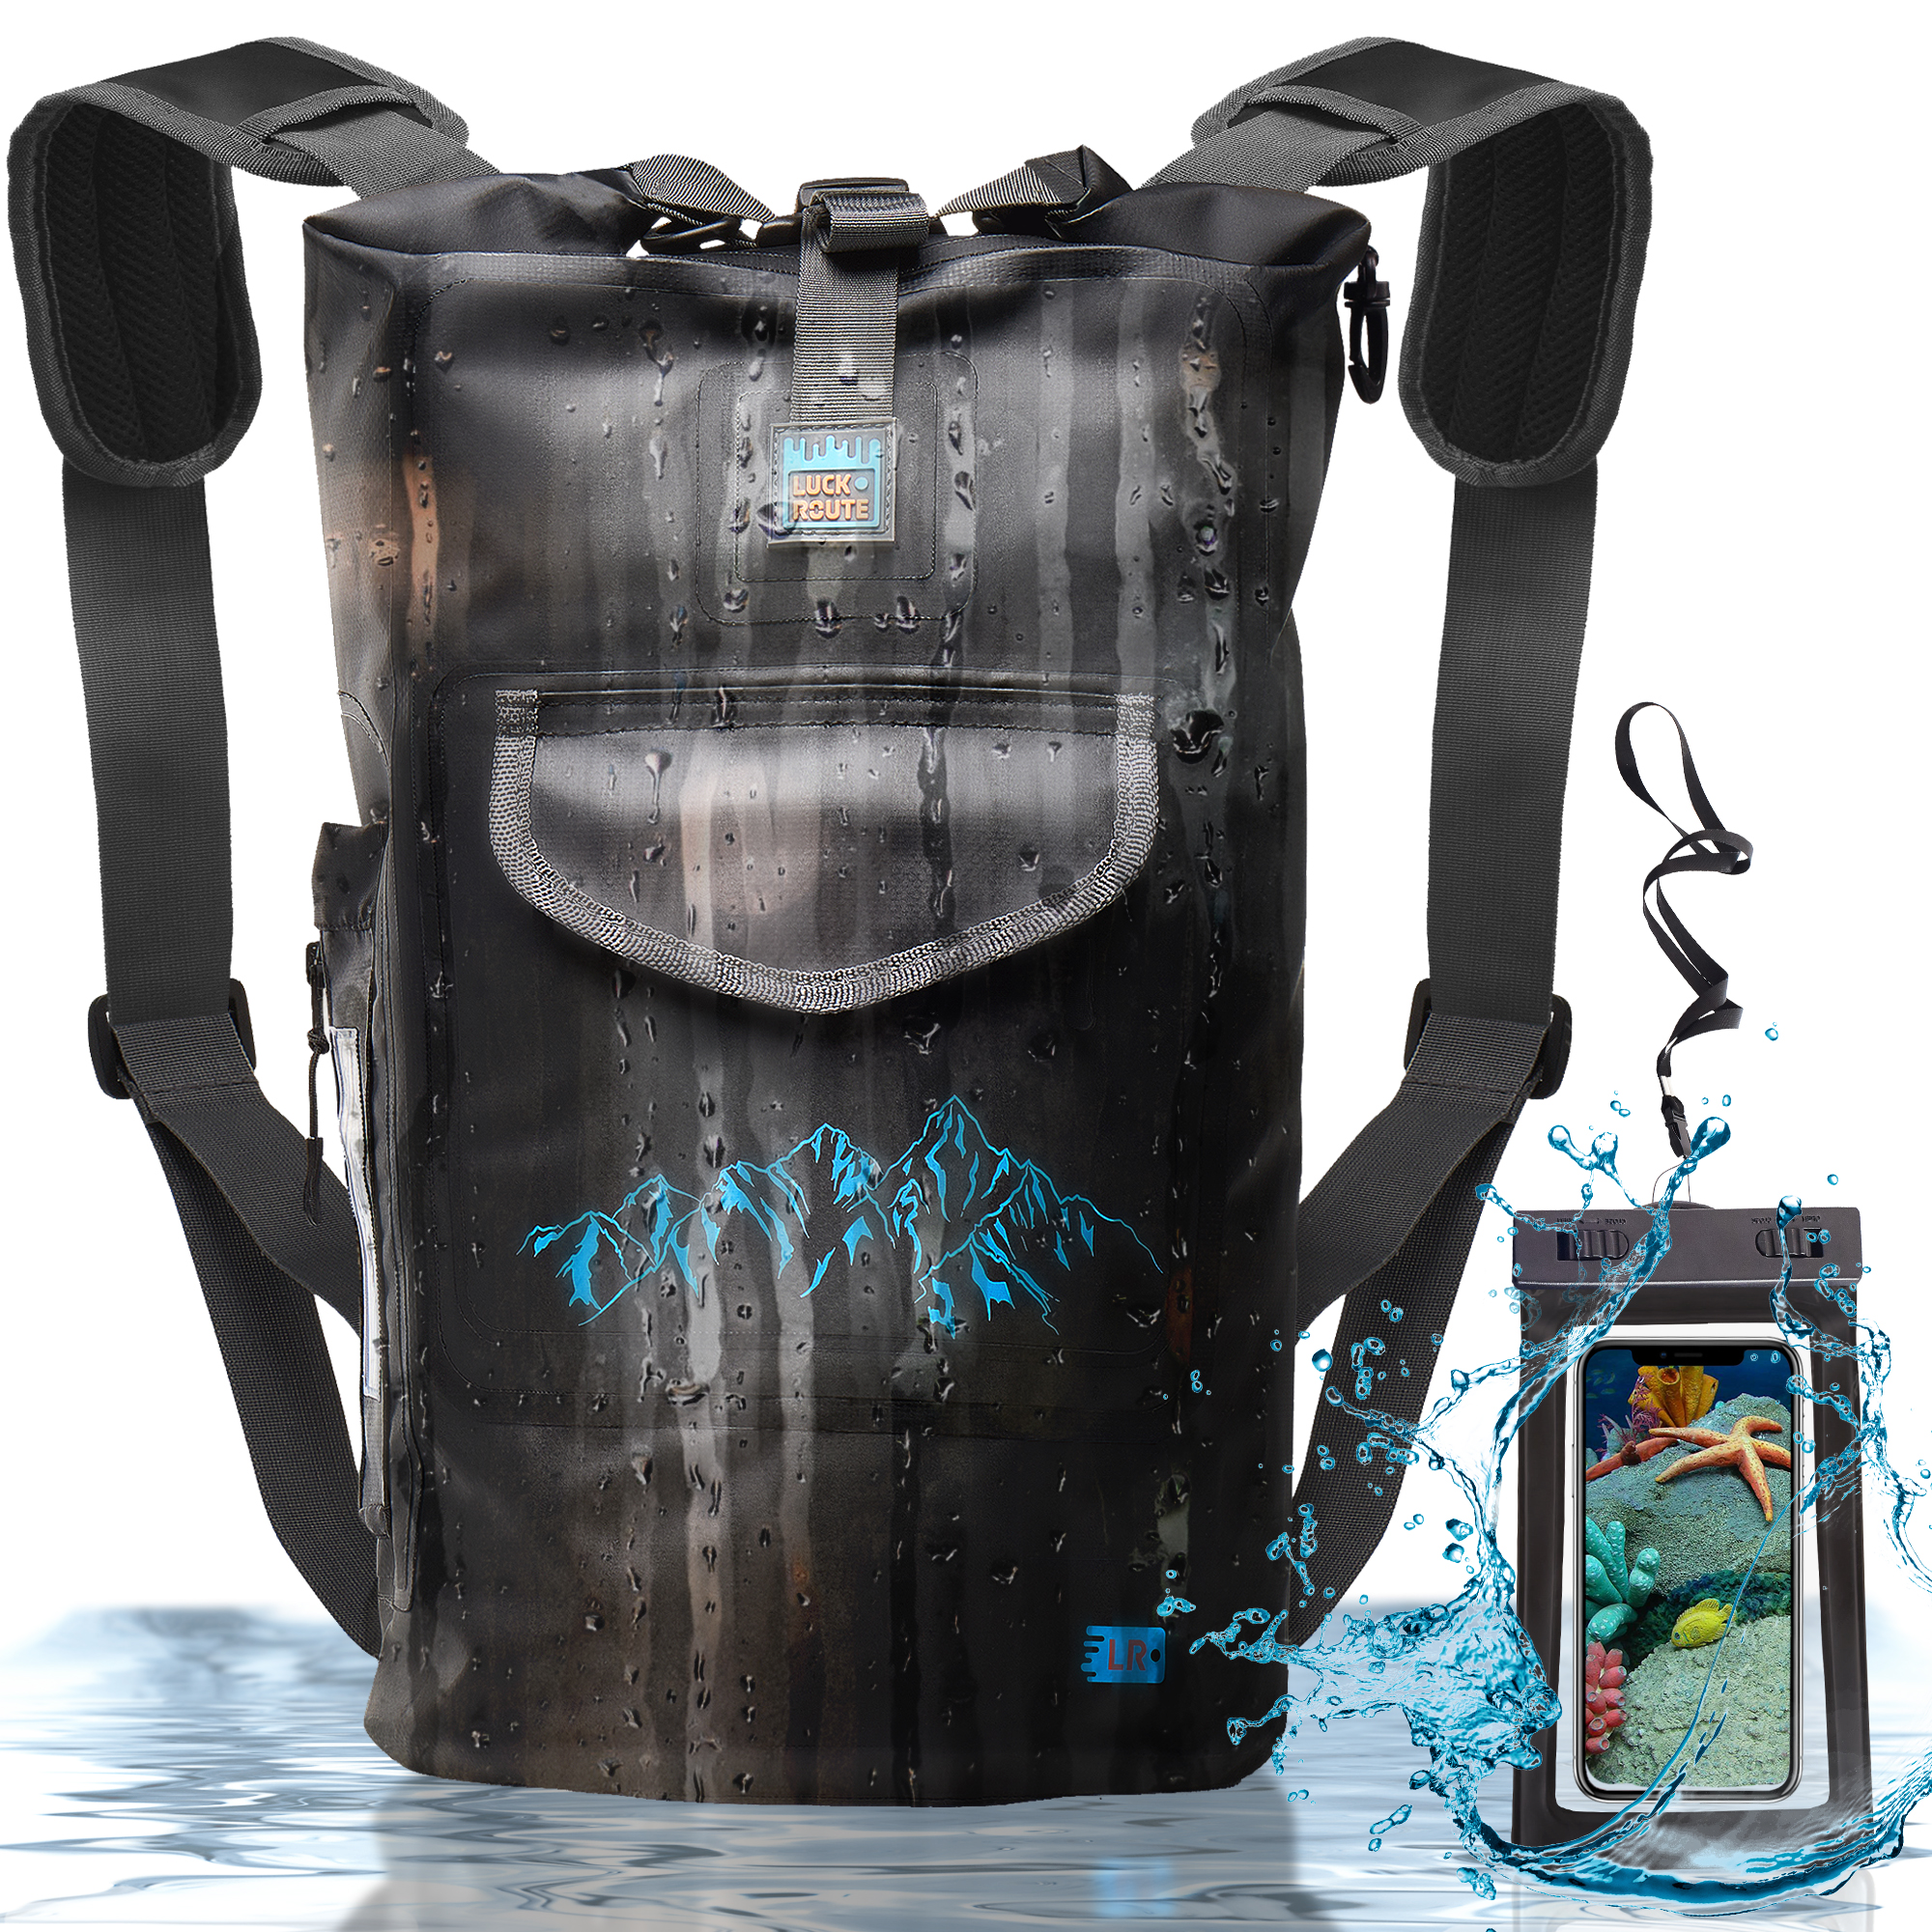 Luck route Dry Bag 20L Black Two Straps